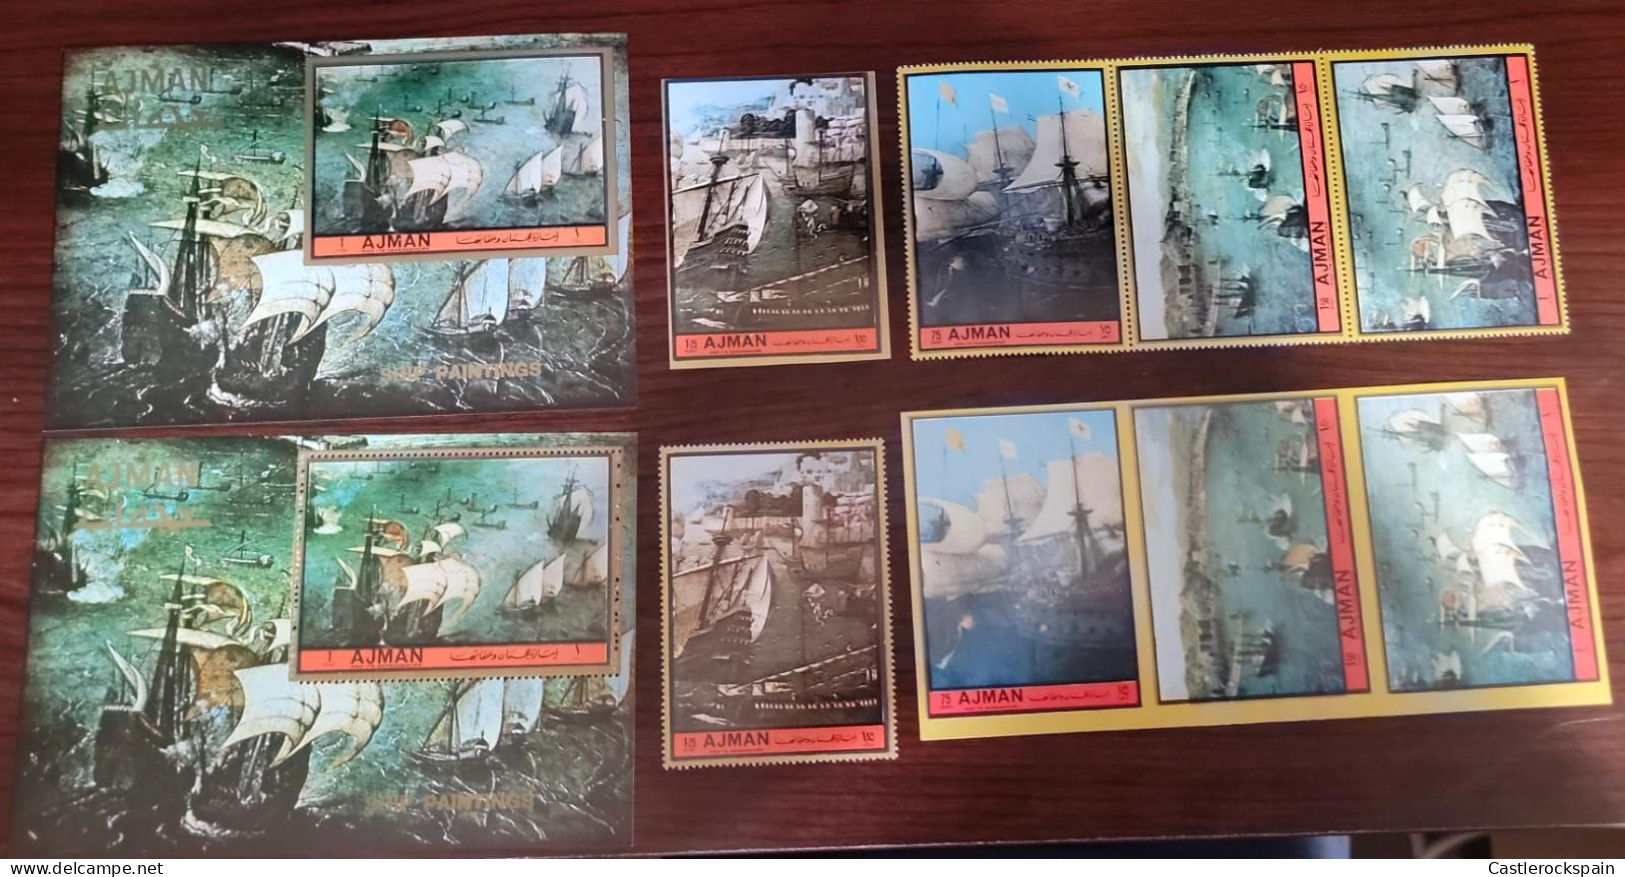 O) AJMAN - IMPERFORATED AND PERFORATED, UNITED ARAB EMIRATES, PAINTING - ART. BOATS - SHIPS, MNH - Adschman